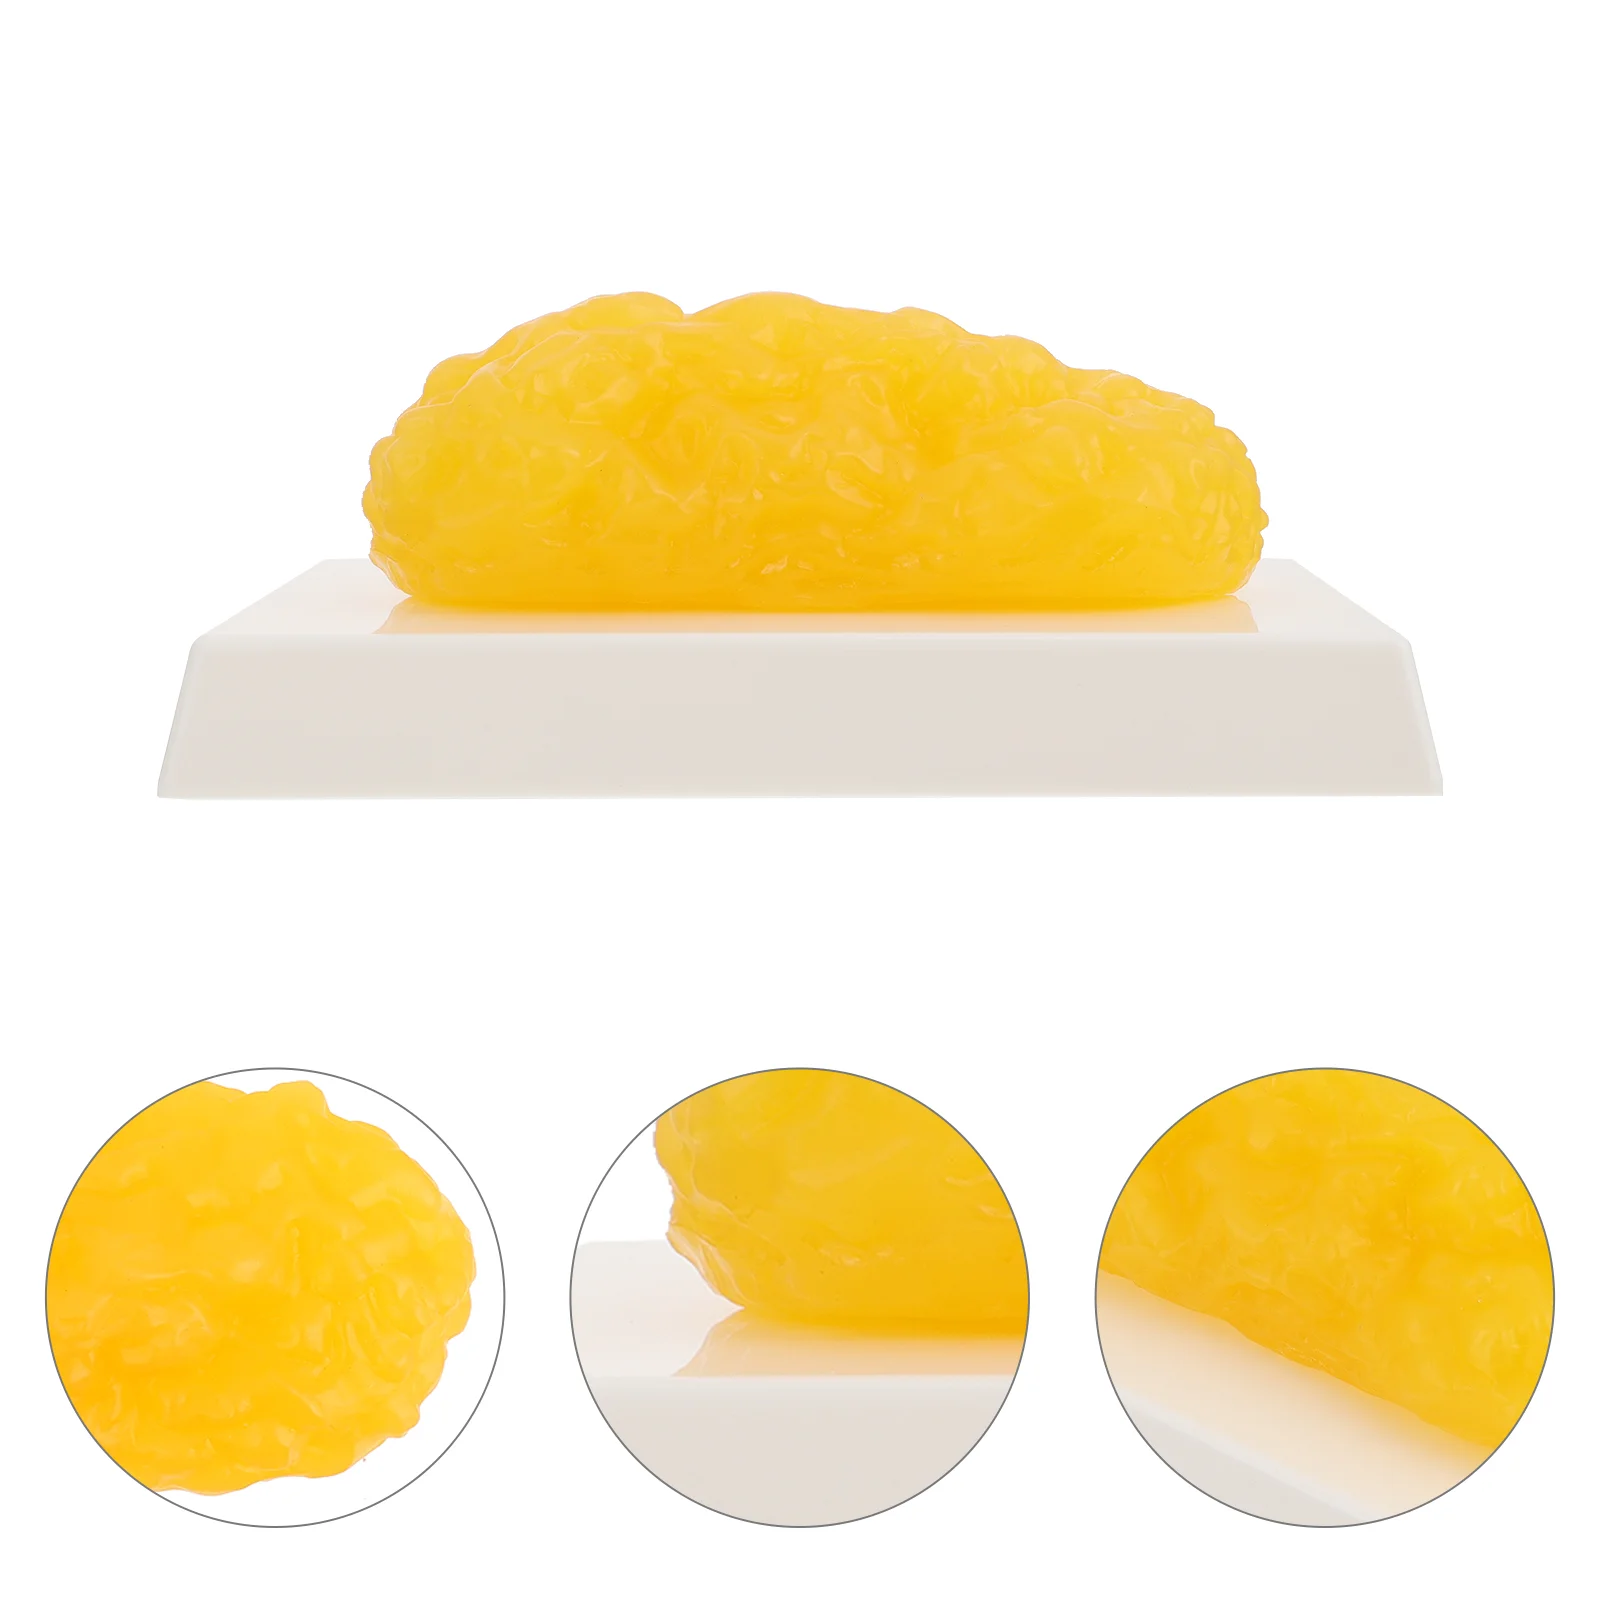 

Human Body Fat Replica Pound Fat Model Fat Anatomical Fat Model for Keep Fit